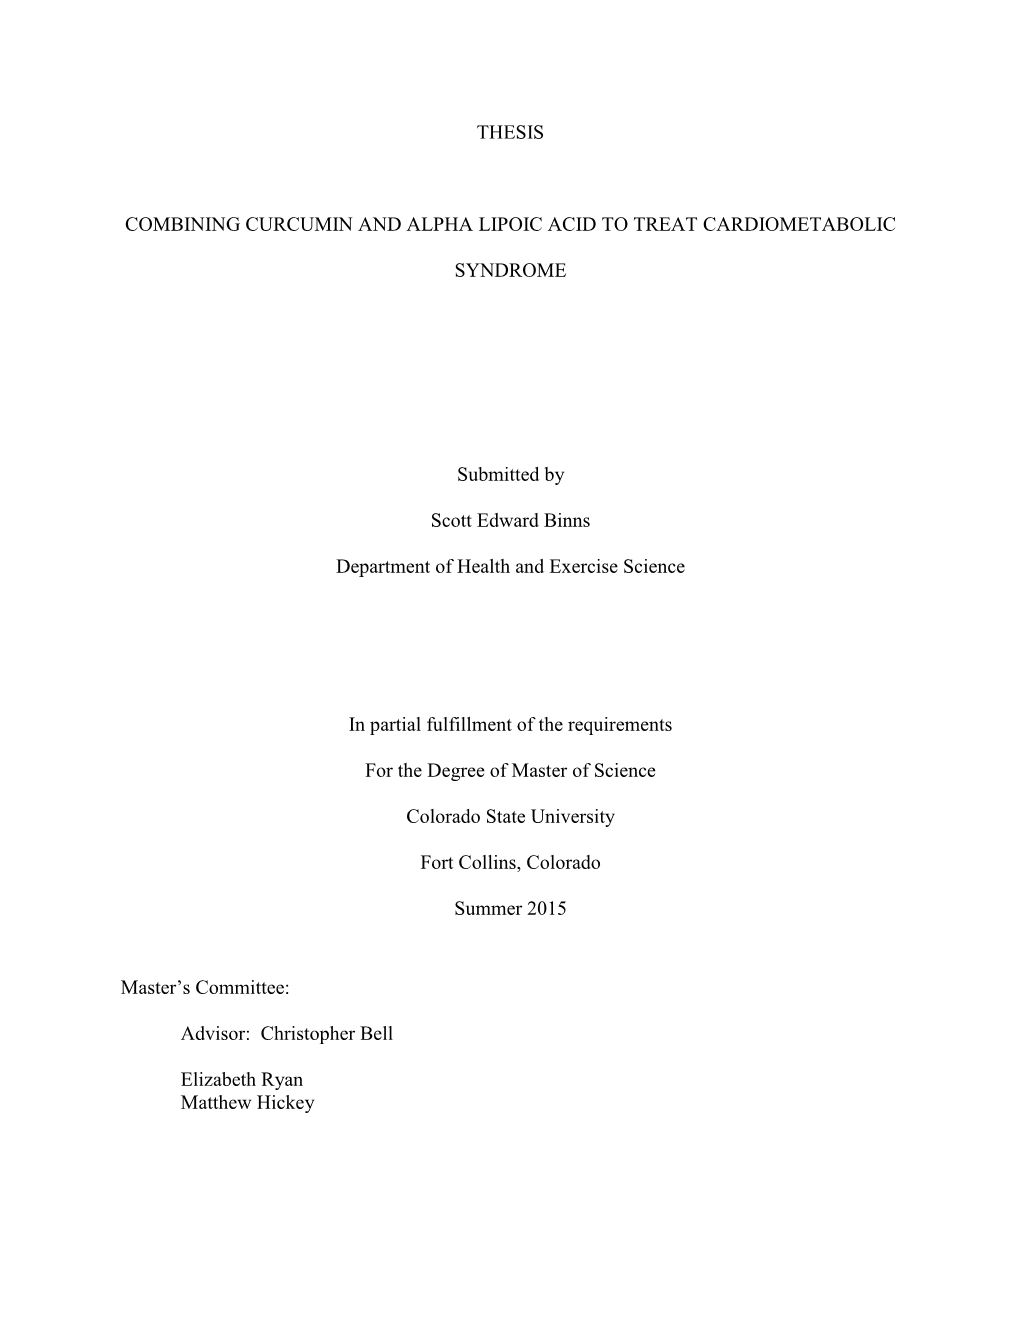 Thesis Combining Curcumin and Alpha Lipoic Acid To